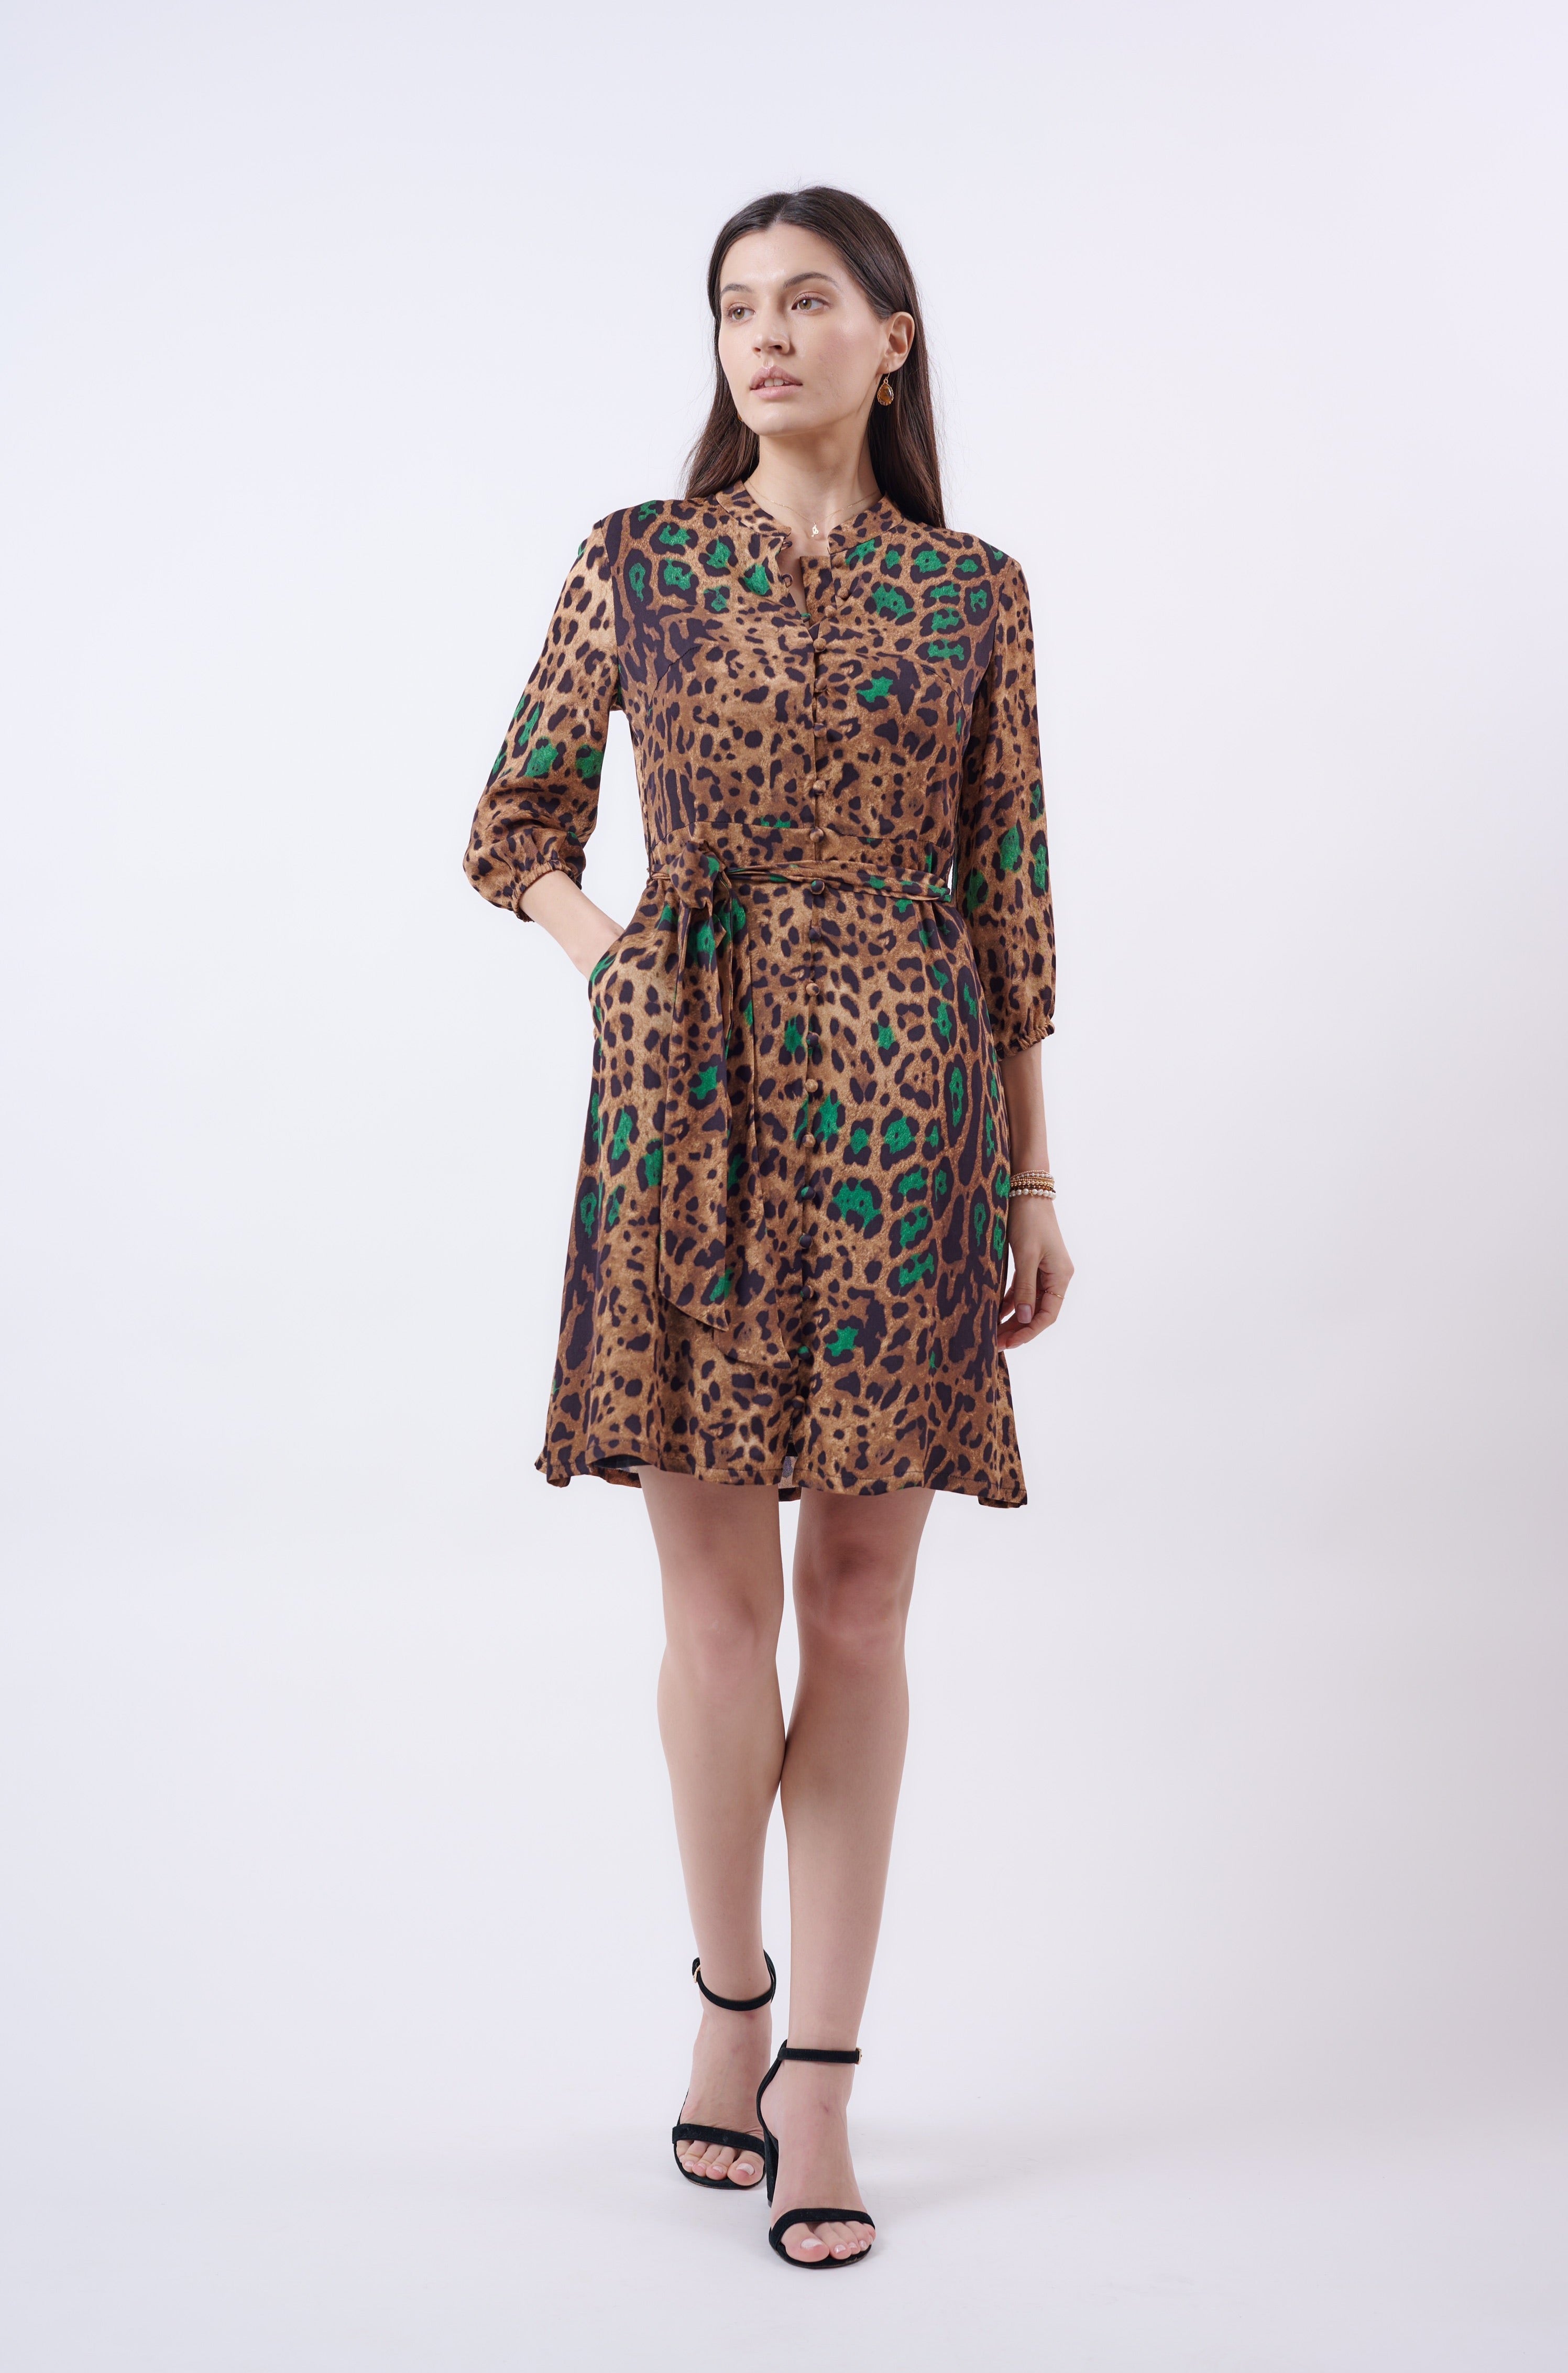 Get your Shelby Leopard Dress Now